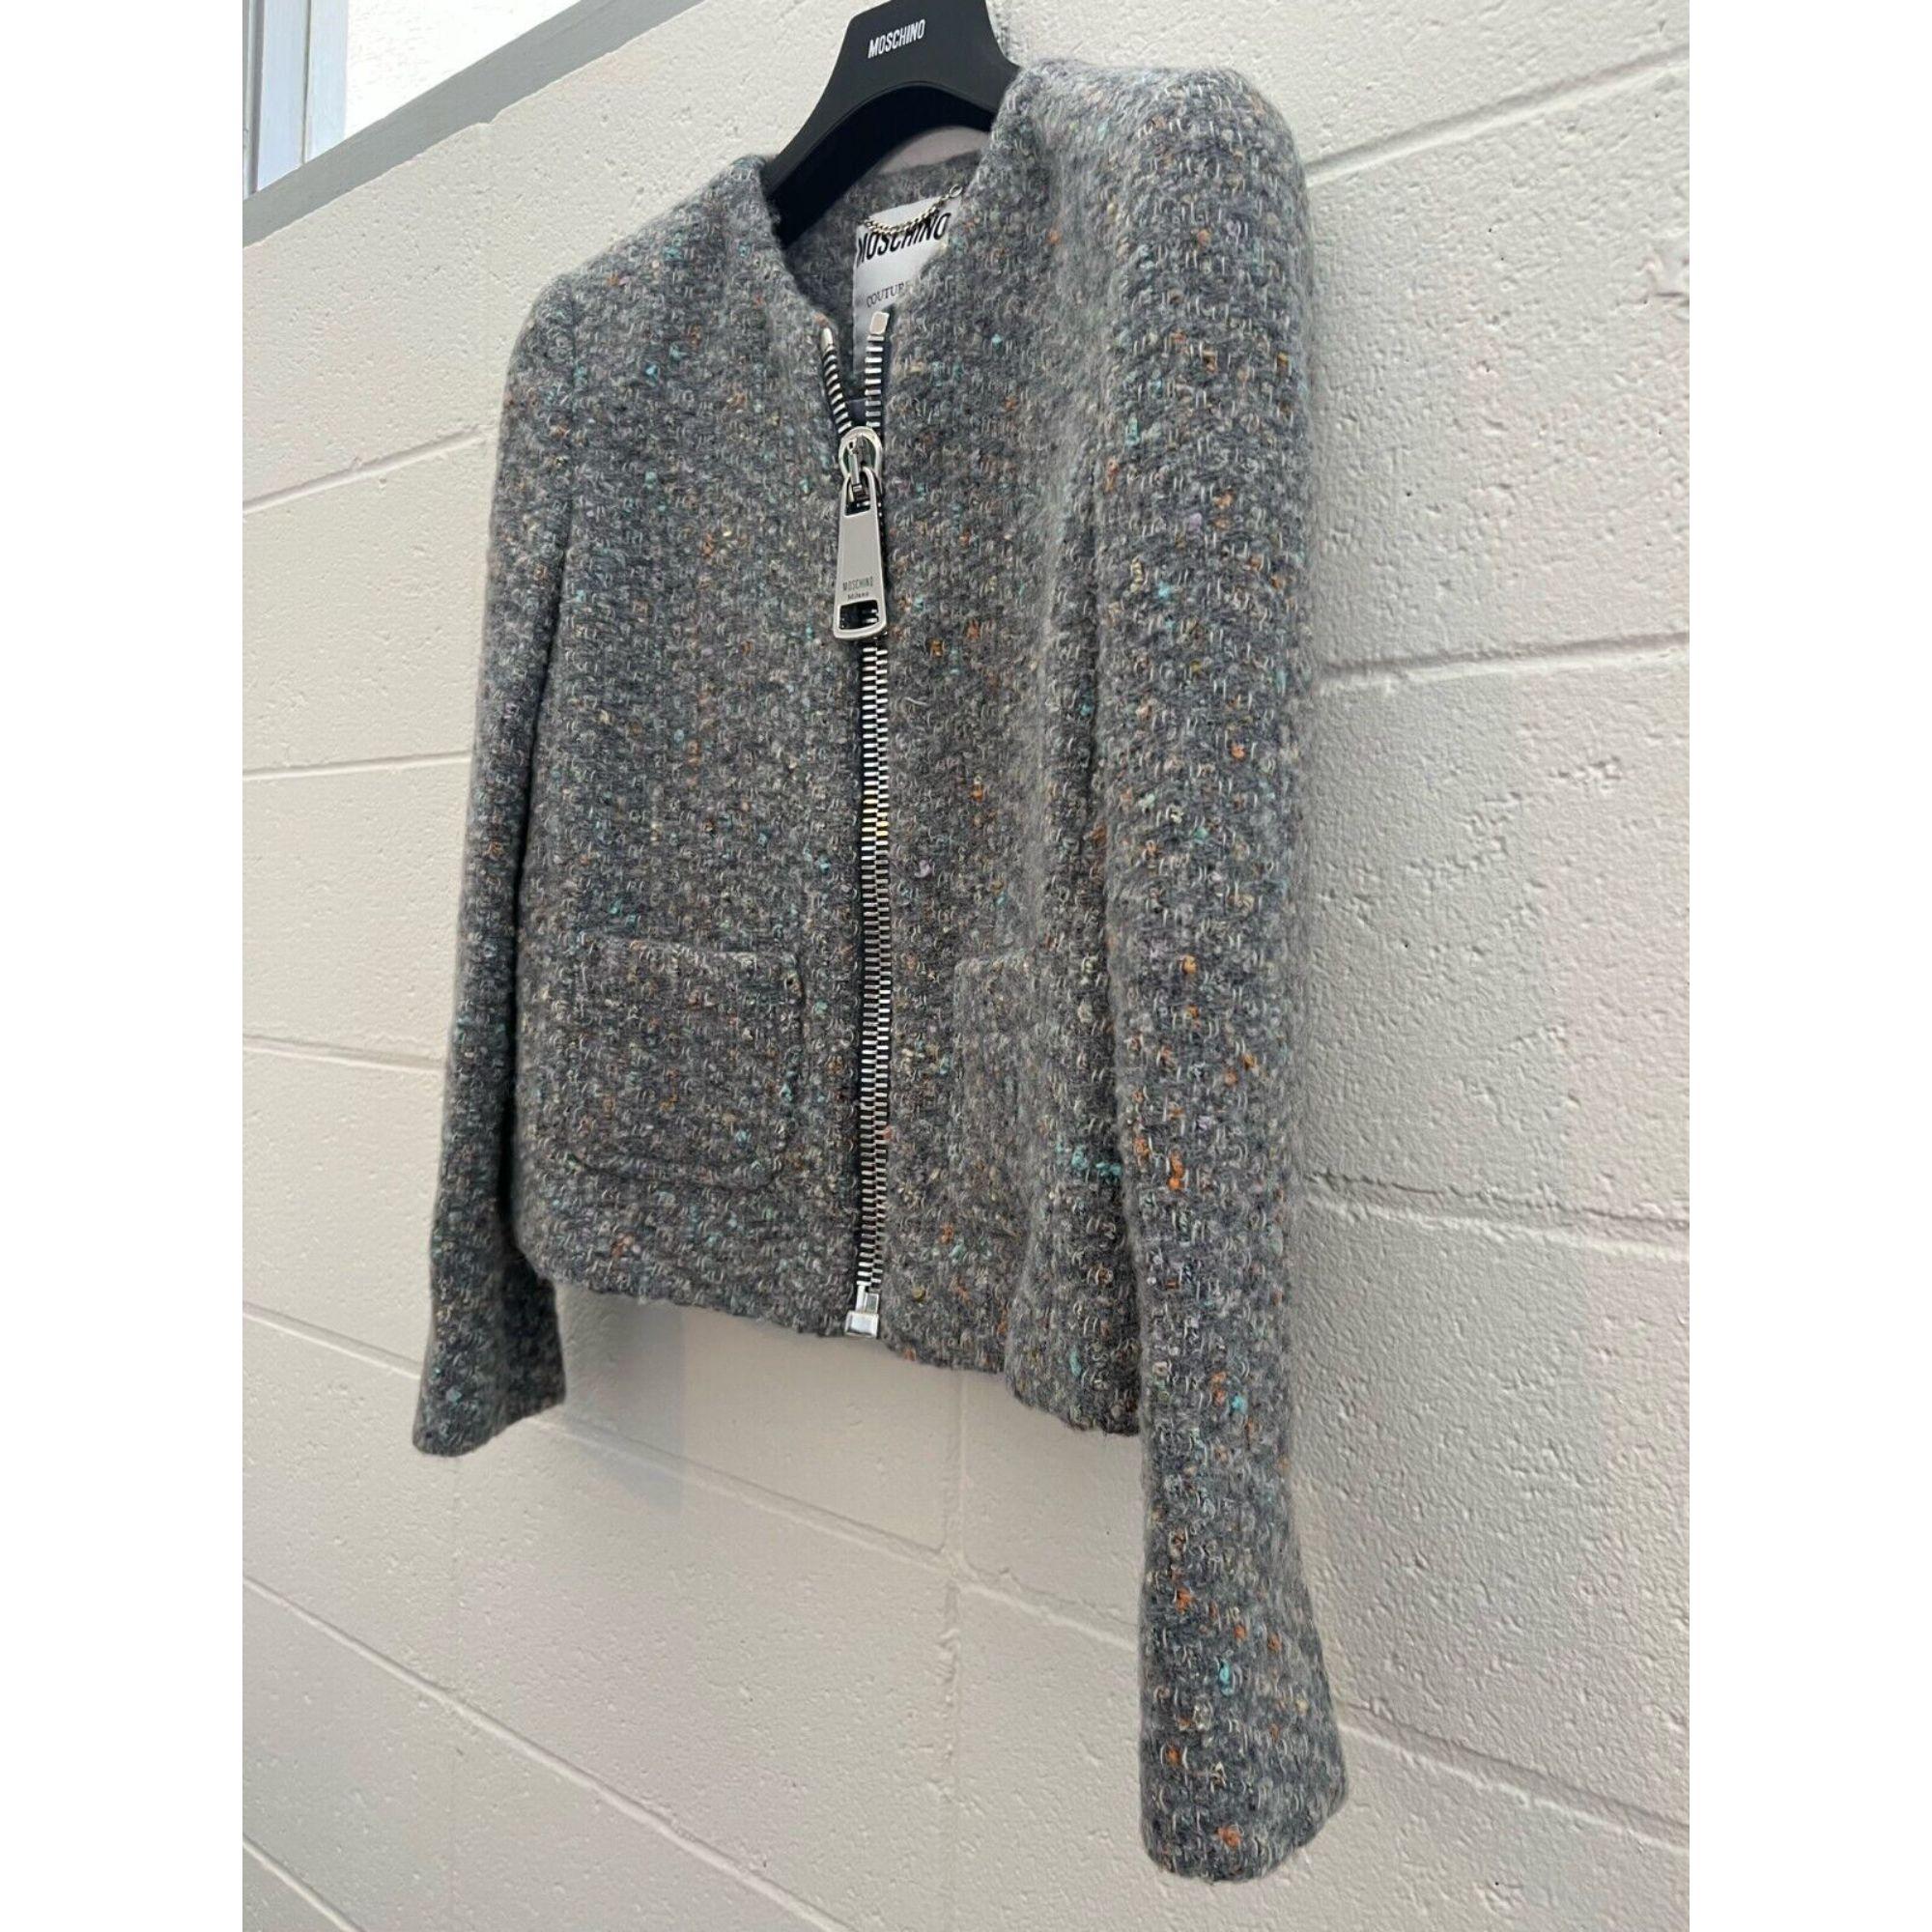 AW20 Moschino Couture Boucle Wool Jacket by Jeremy Scott, Size US 10 For Sale 6